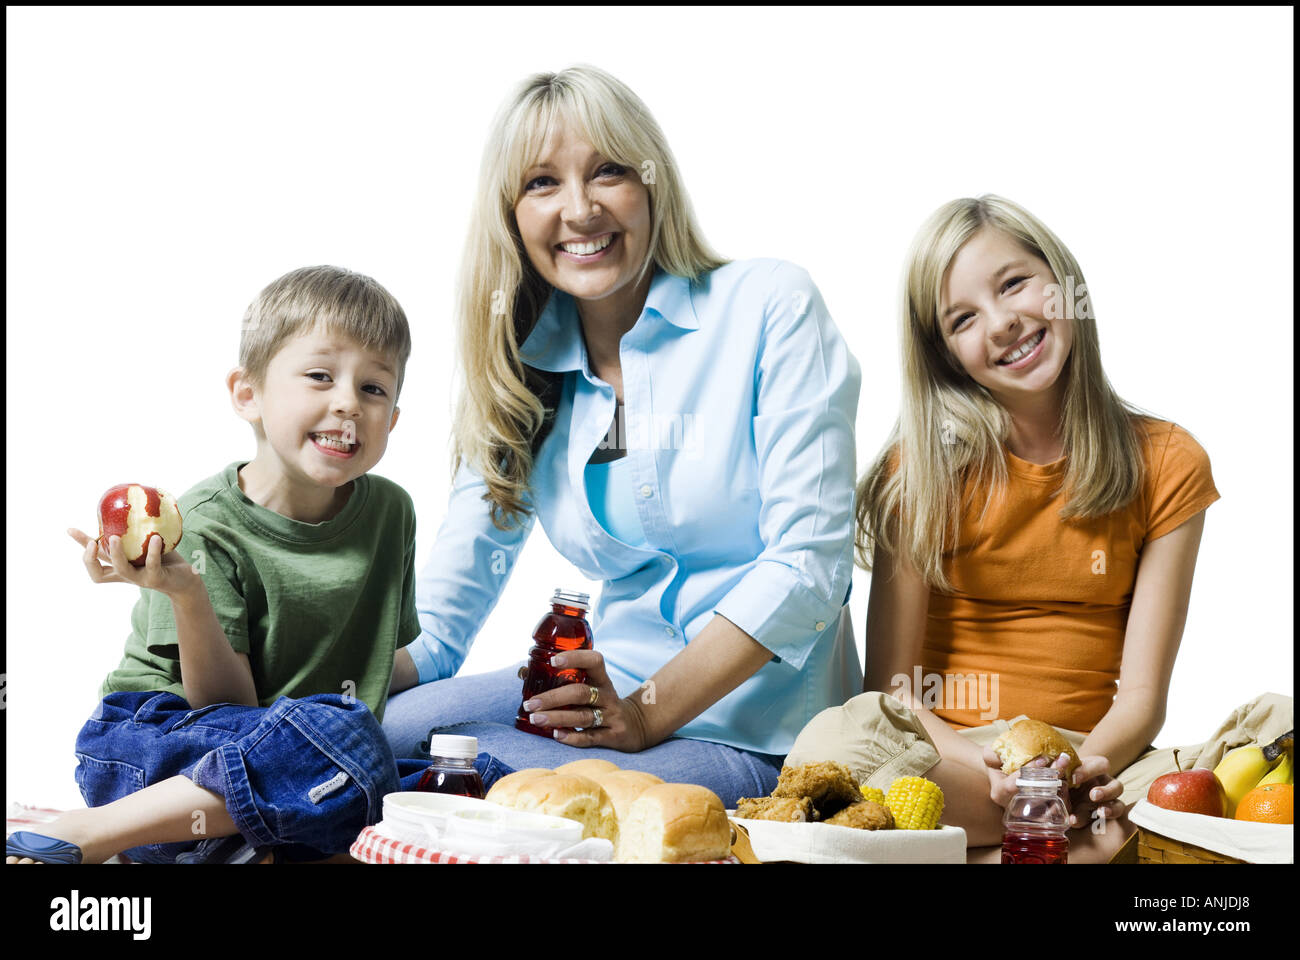 Portrait of a woman and her two children having a picnic Stock Photo